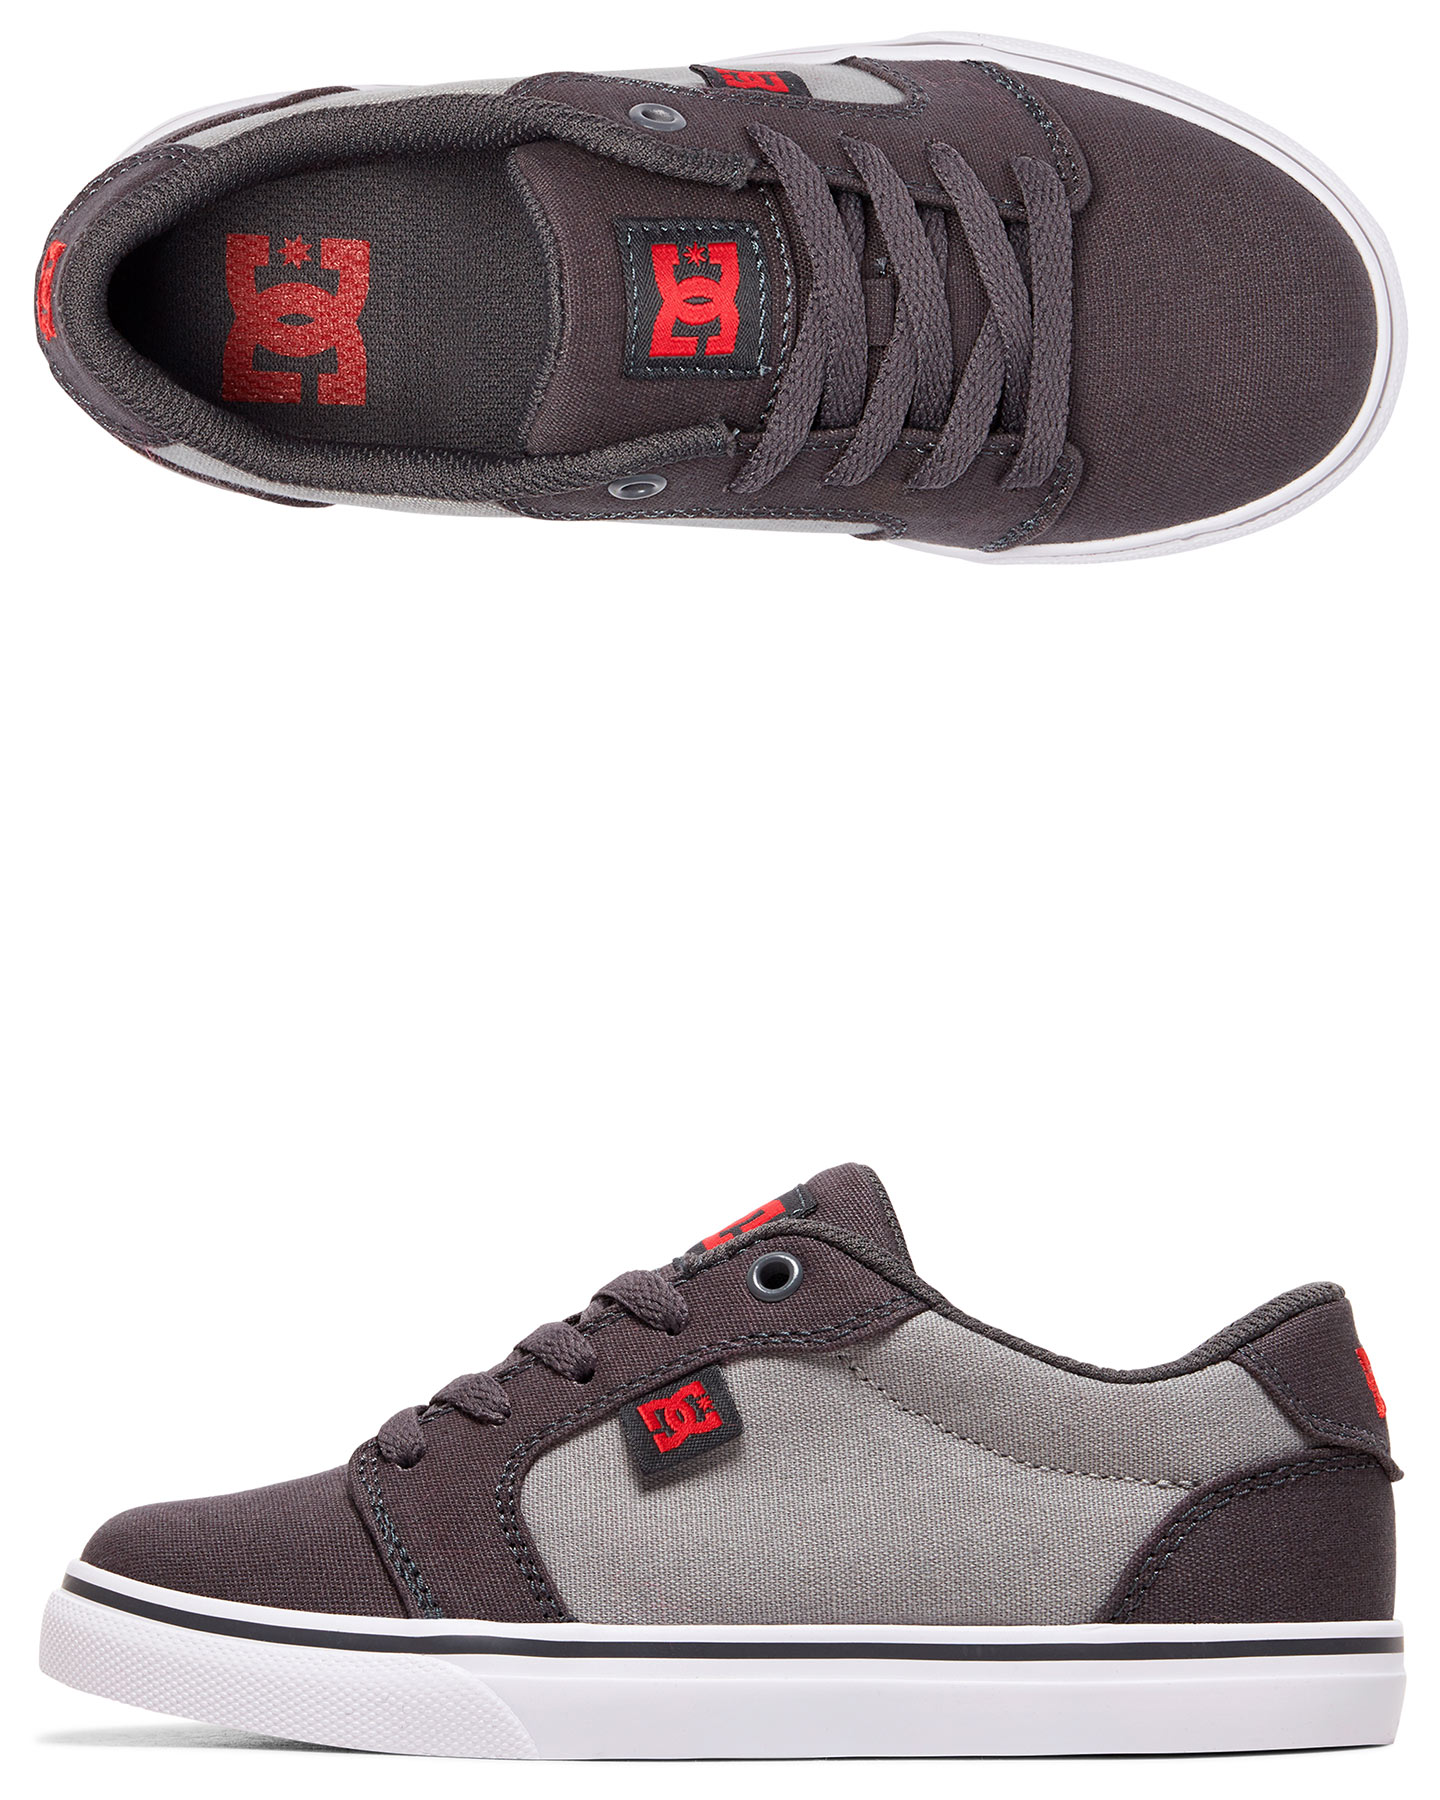 Dc Shoes Anvil Tx Shoe - Youth - Grey 